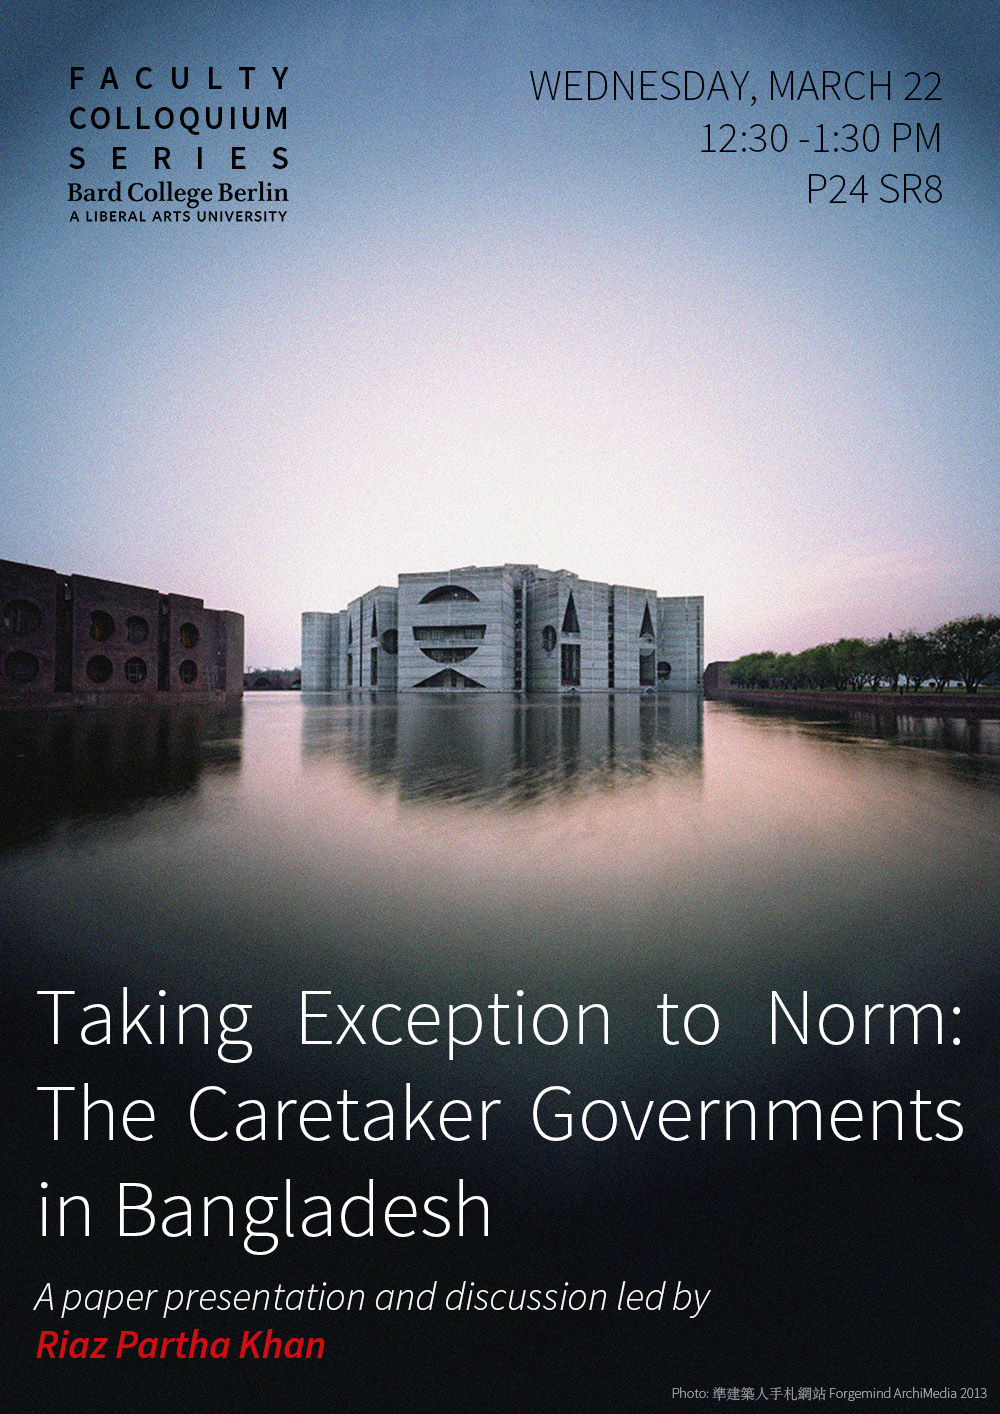 Taking Exception to Norm: The Caretaker Governments in Bangladesh